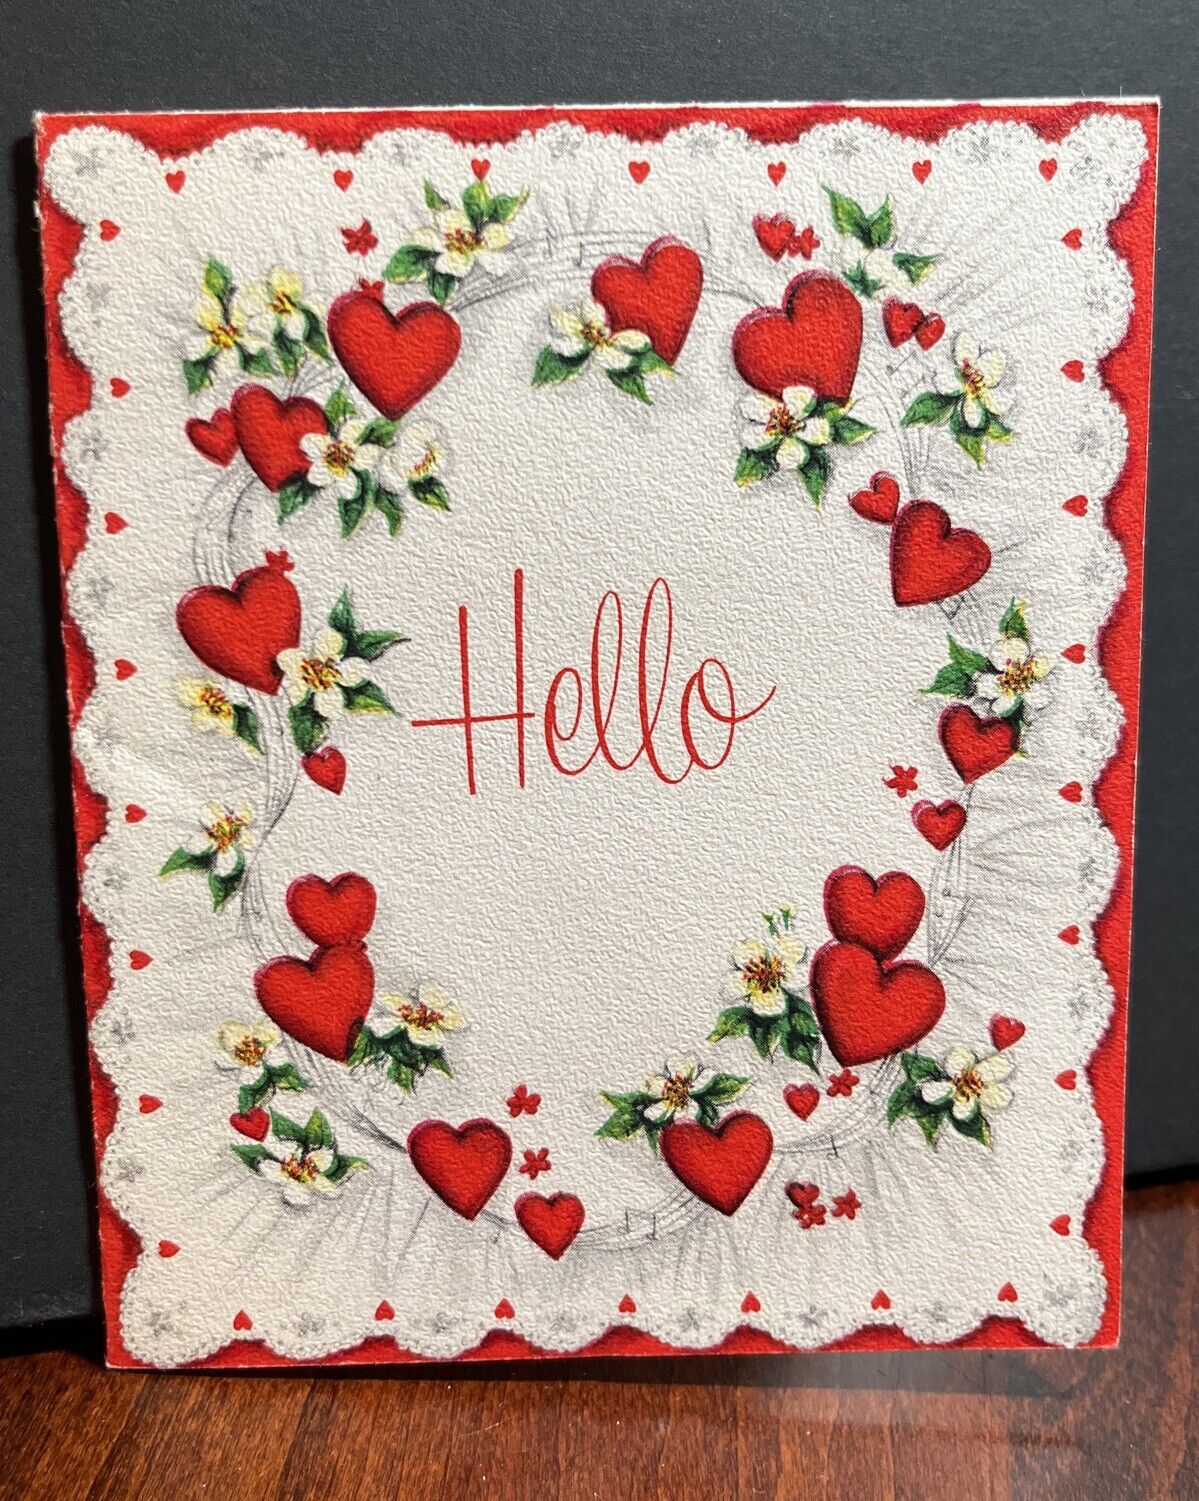 Vintage Hallmark Valentine’s Day Card Hearts/Lace/Flowers/Music Notes, 5V 1-5